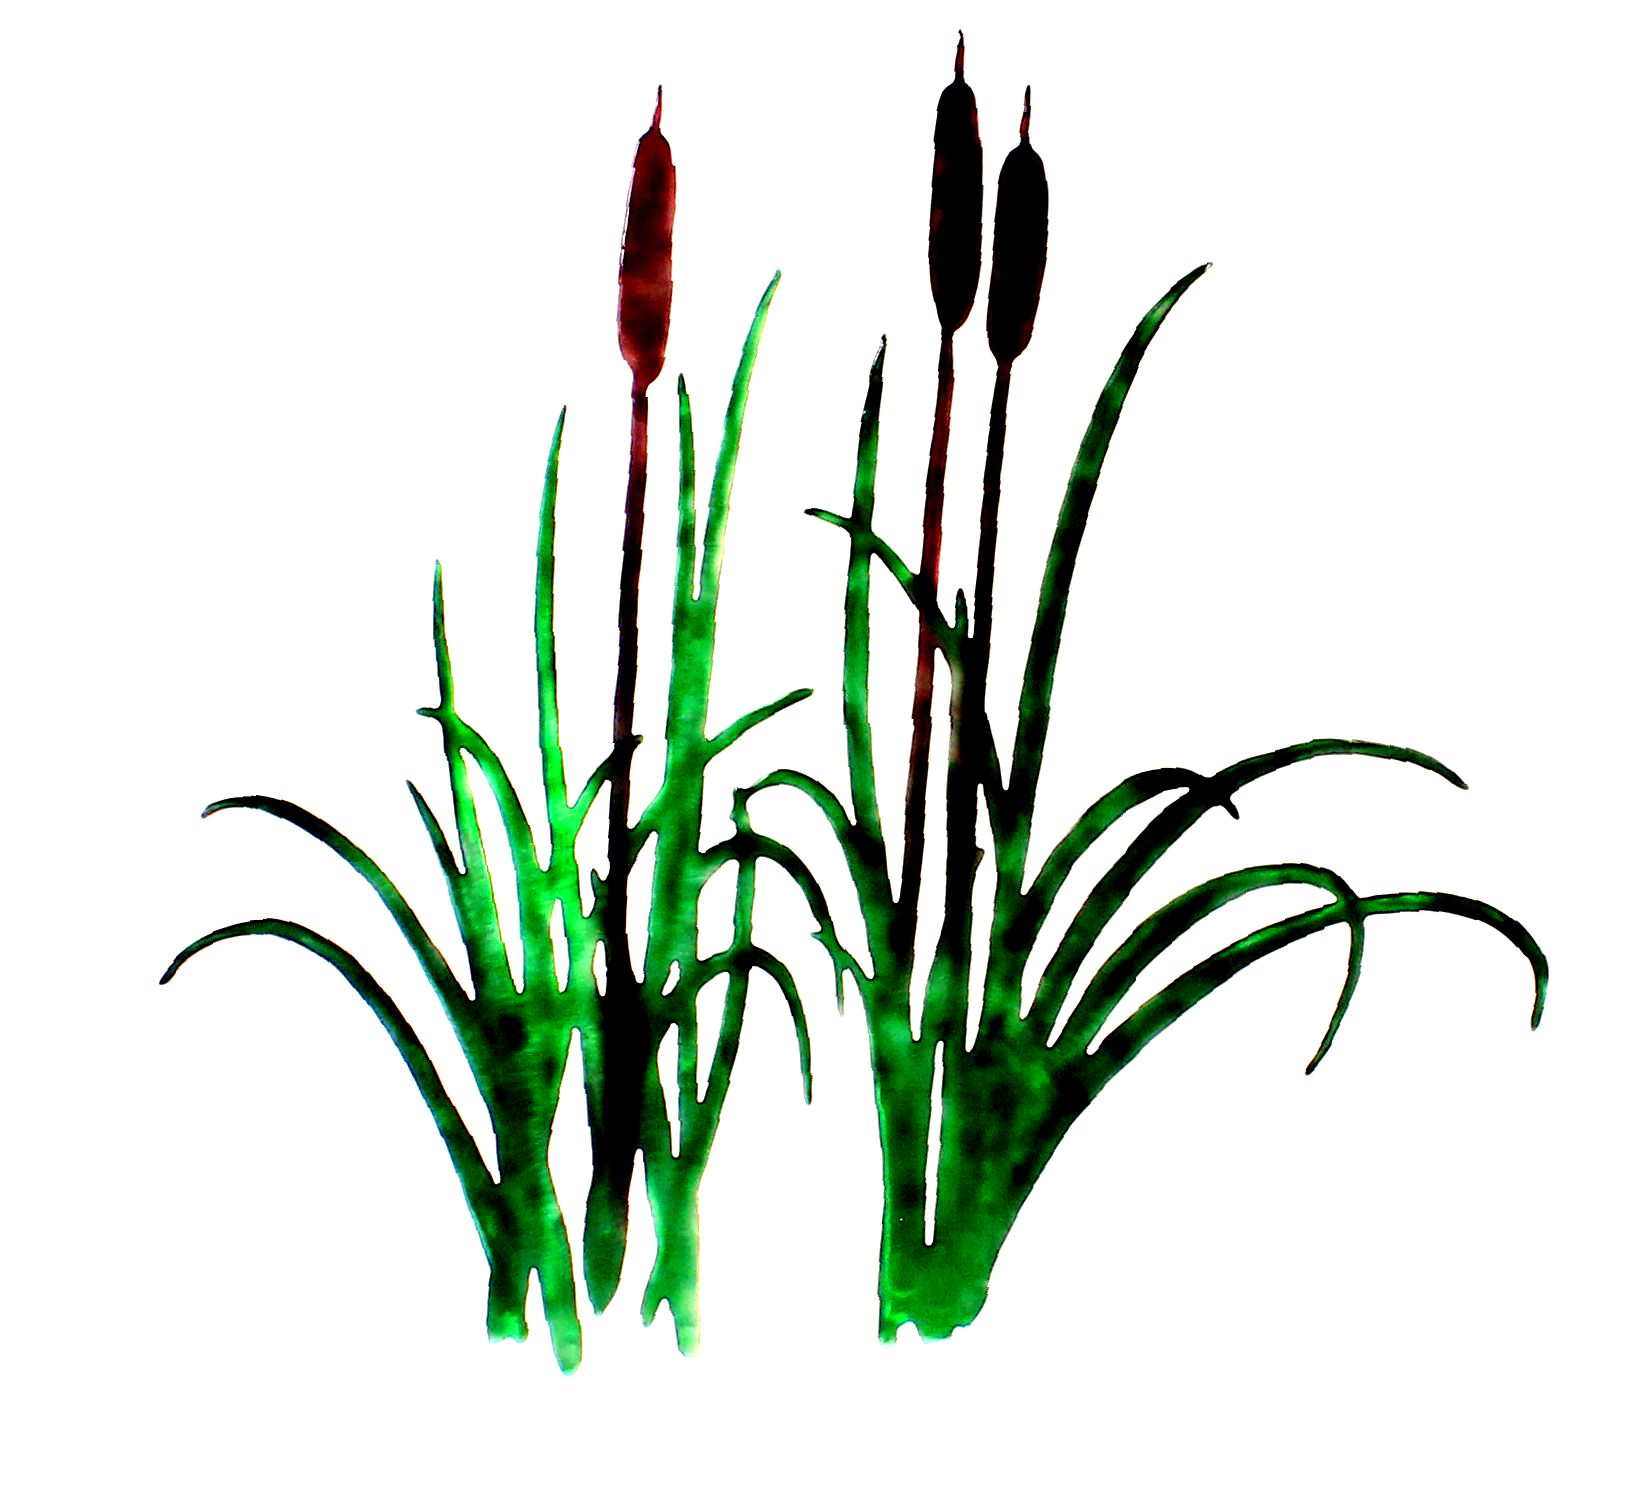 ... Image of Cattails Clipart #6037, Cattails Silhouette Clipart Free .